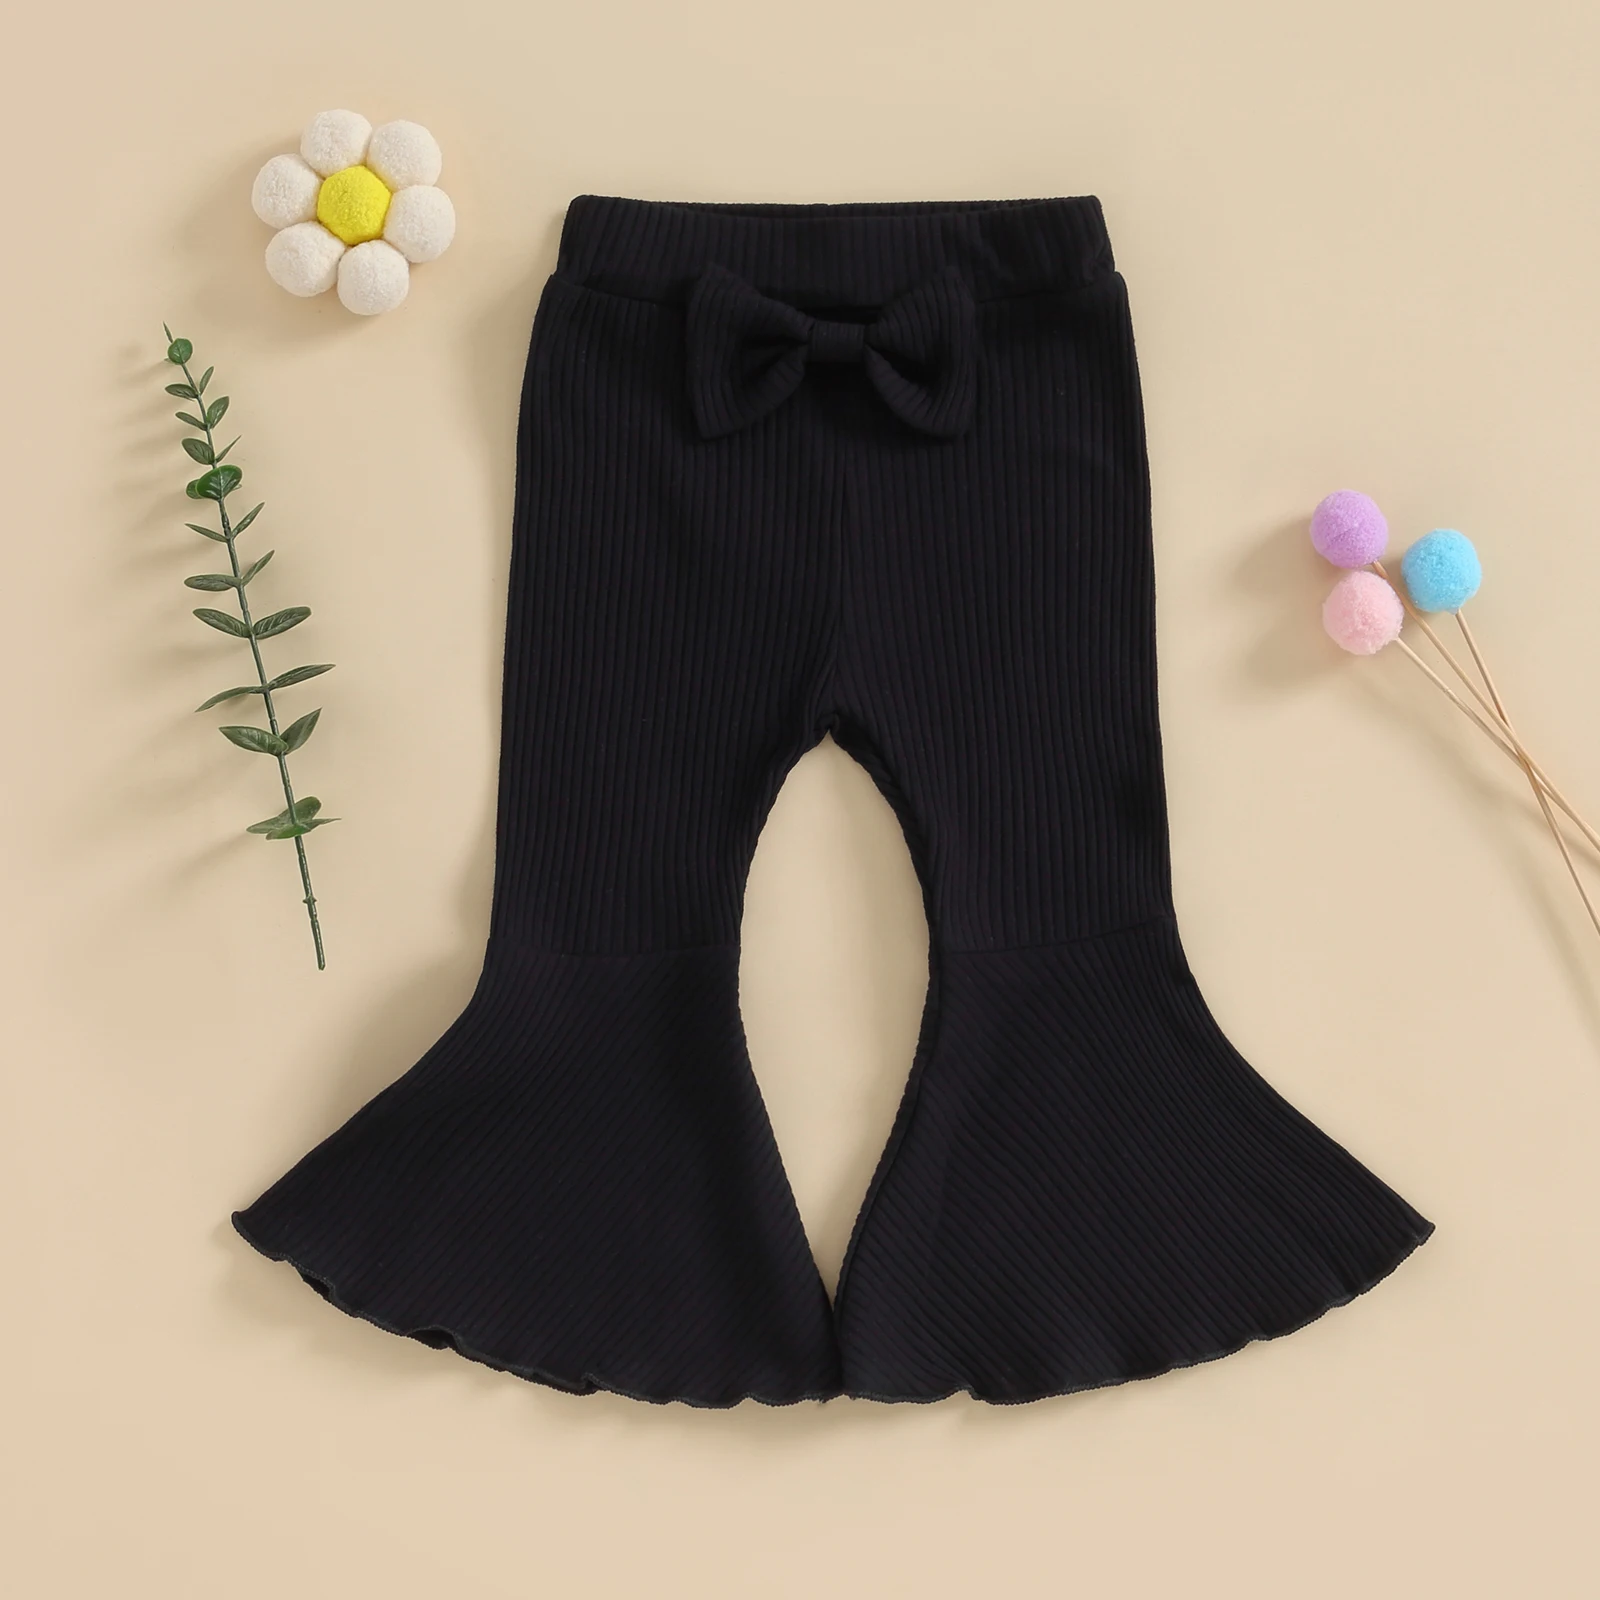 S23338eae397b4787a9c0efe514b30682P Cute Kids Baby Girls Flare Pants Soft Cotton Solid Color Ribbed Elastic Toddler Bell Bottoms Trousers Bow Ruffle Pants for Child